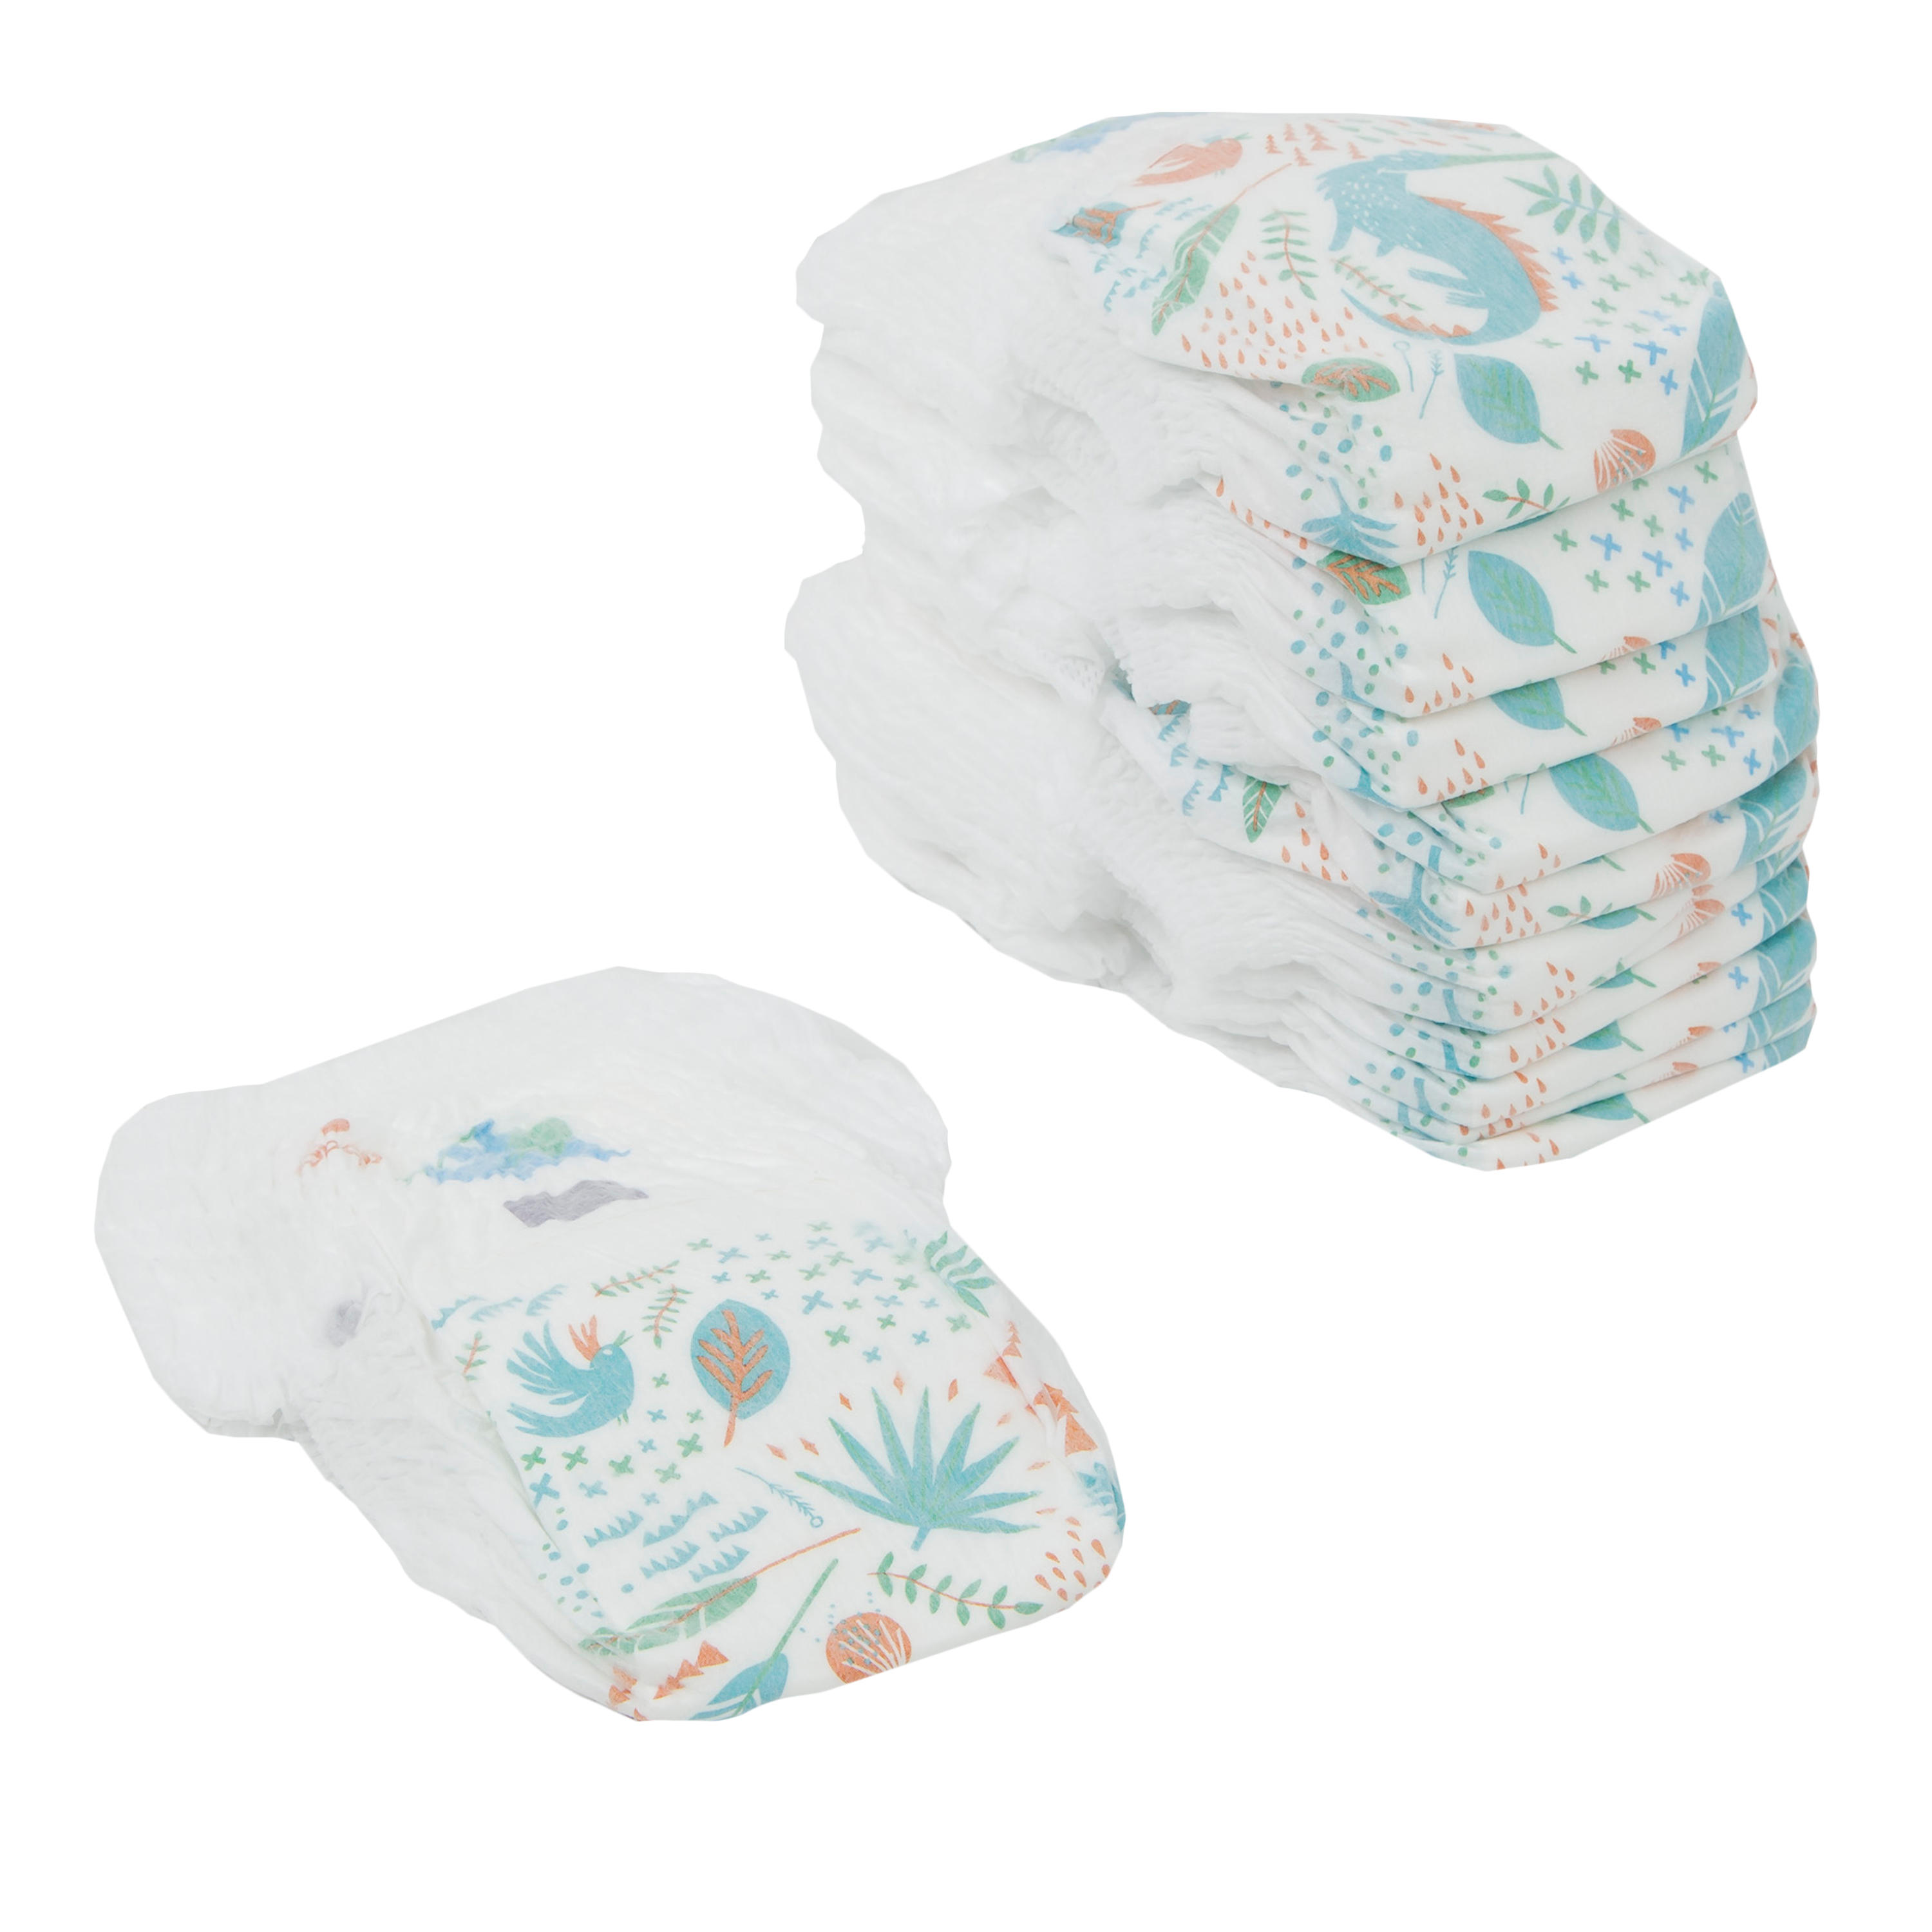 Baby Swimming Disposable Nappies 11 To 18 kg Pack of 12